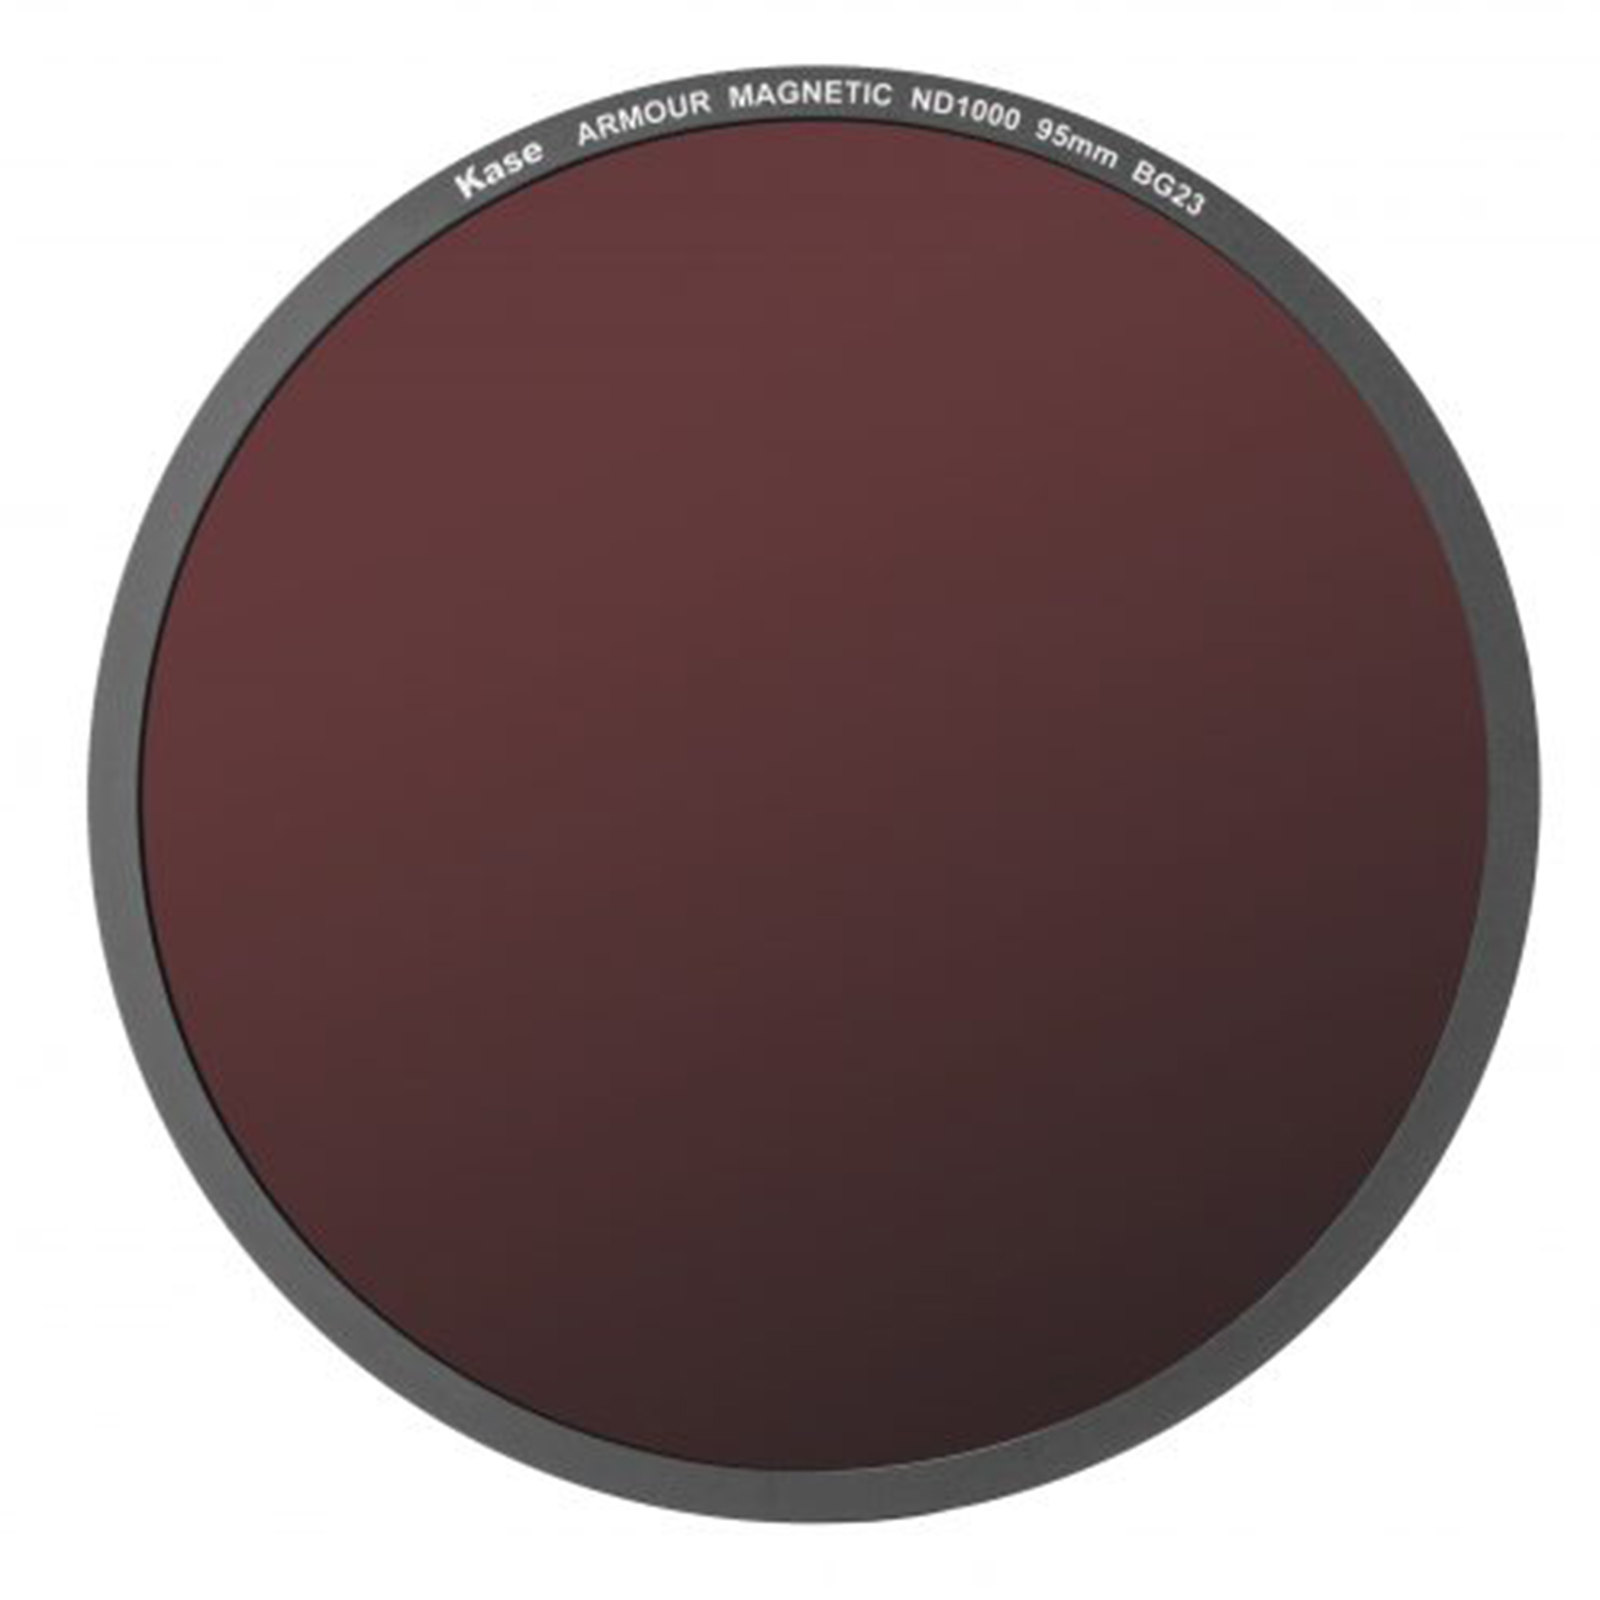 Image of Kase 95mm Armour Magnetic Circular Filter ND1000